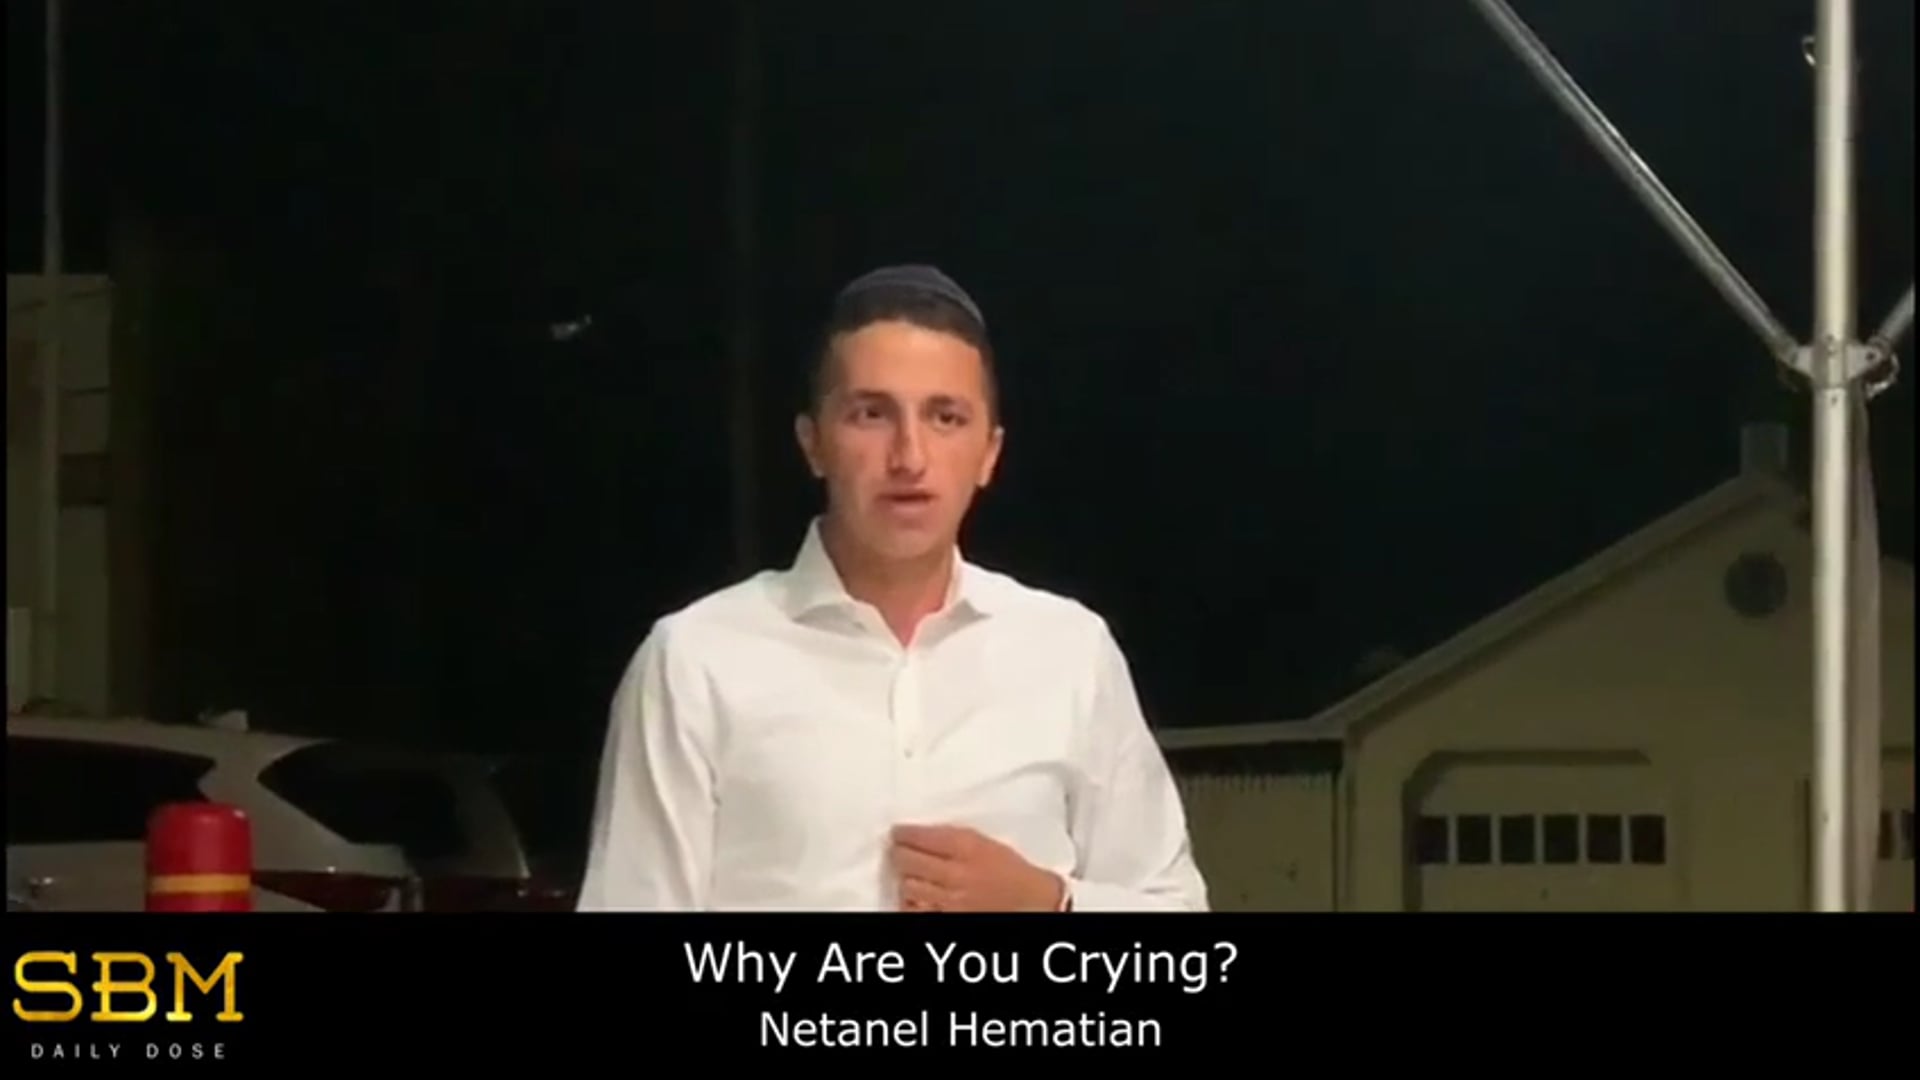 Why Are You Crying? - Netanel Hematian